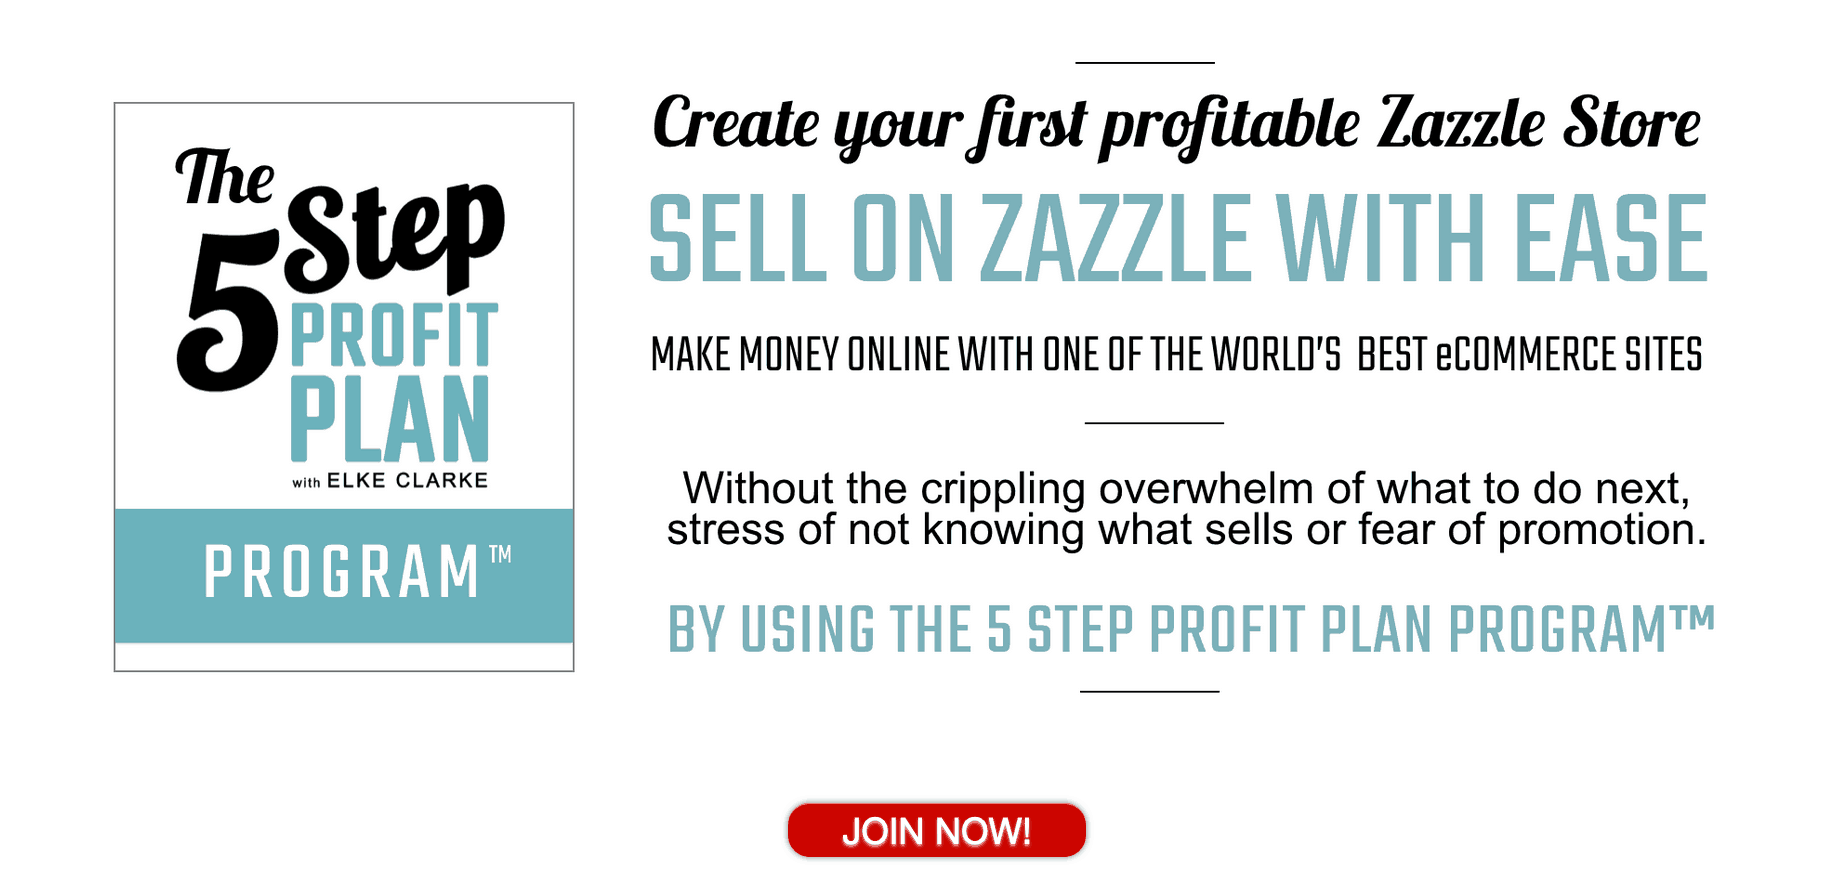 Create your first profitable Zazzle store. Enrollment is now open for The 5 Stpe Profit Plan Program™. Click to learn more and join today. 